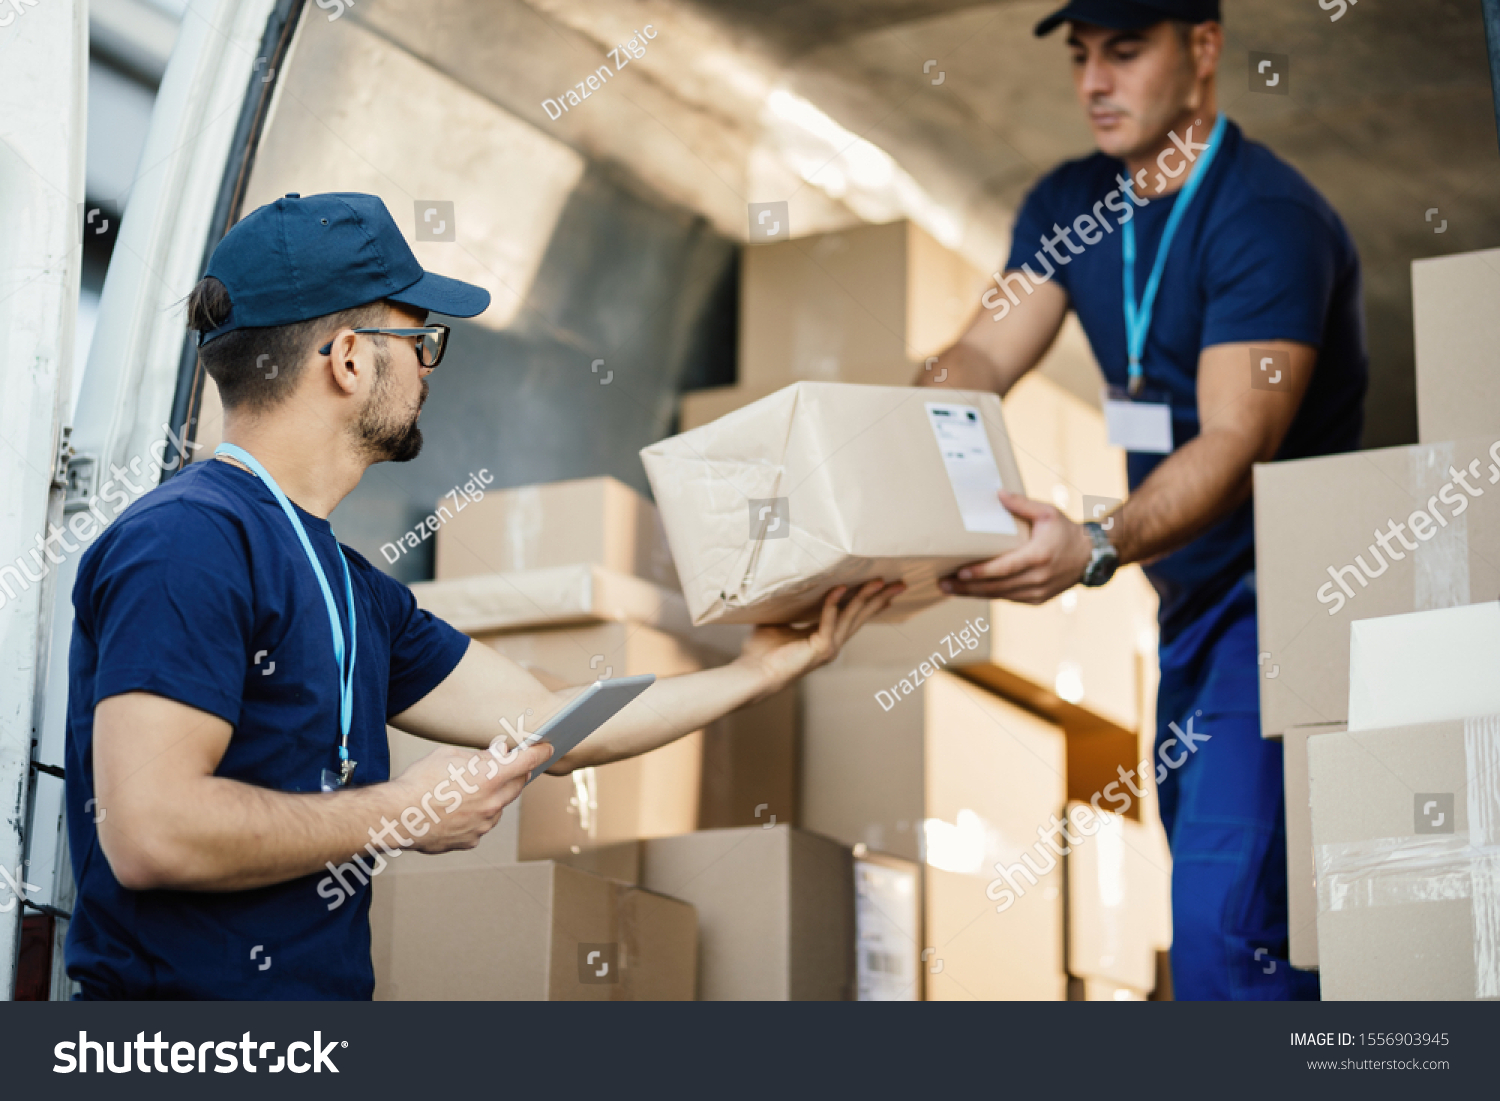 Young courier using touchpad while loading packages with his coworker in a delivery van.  #1556903945